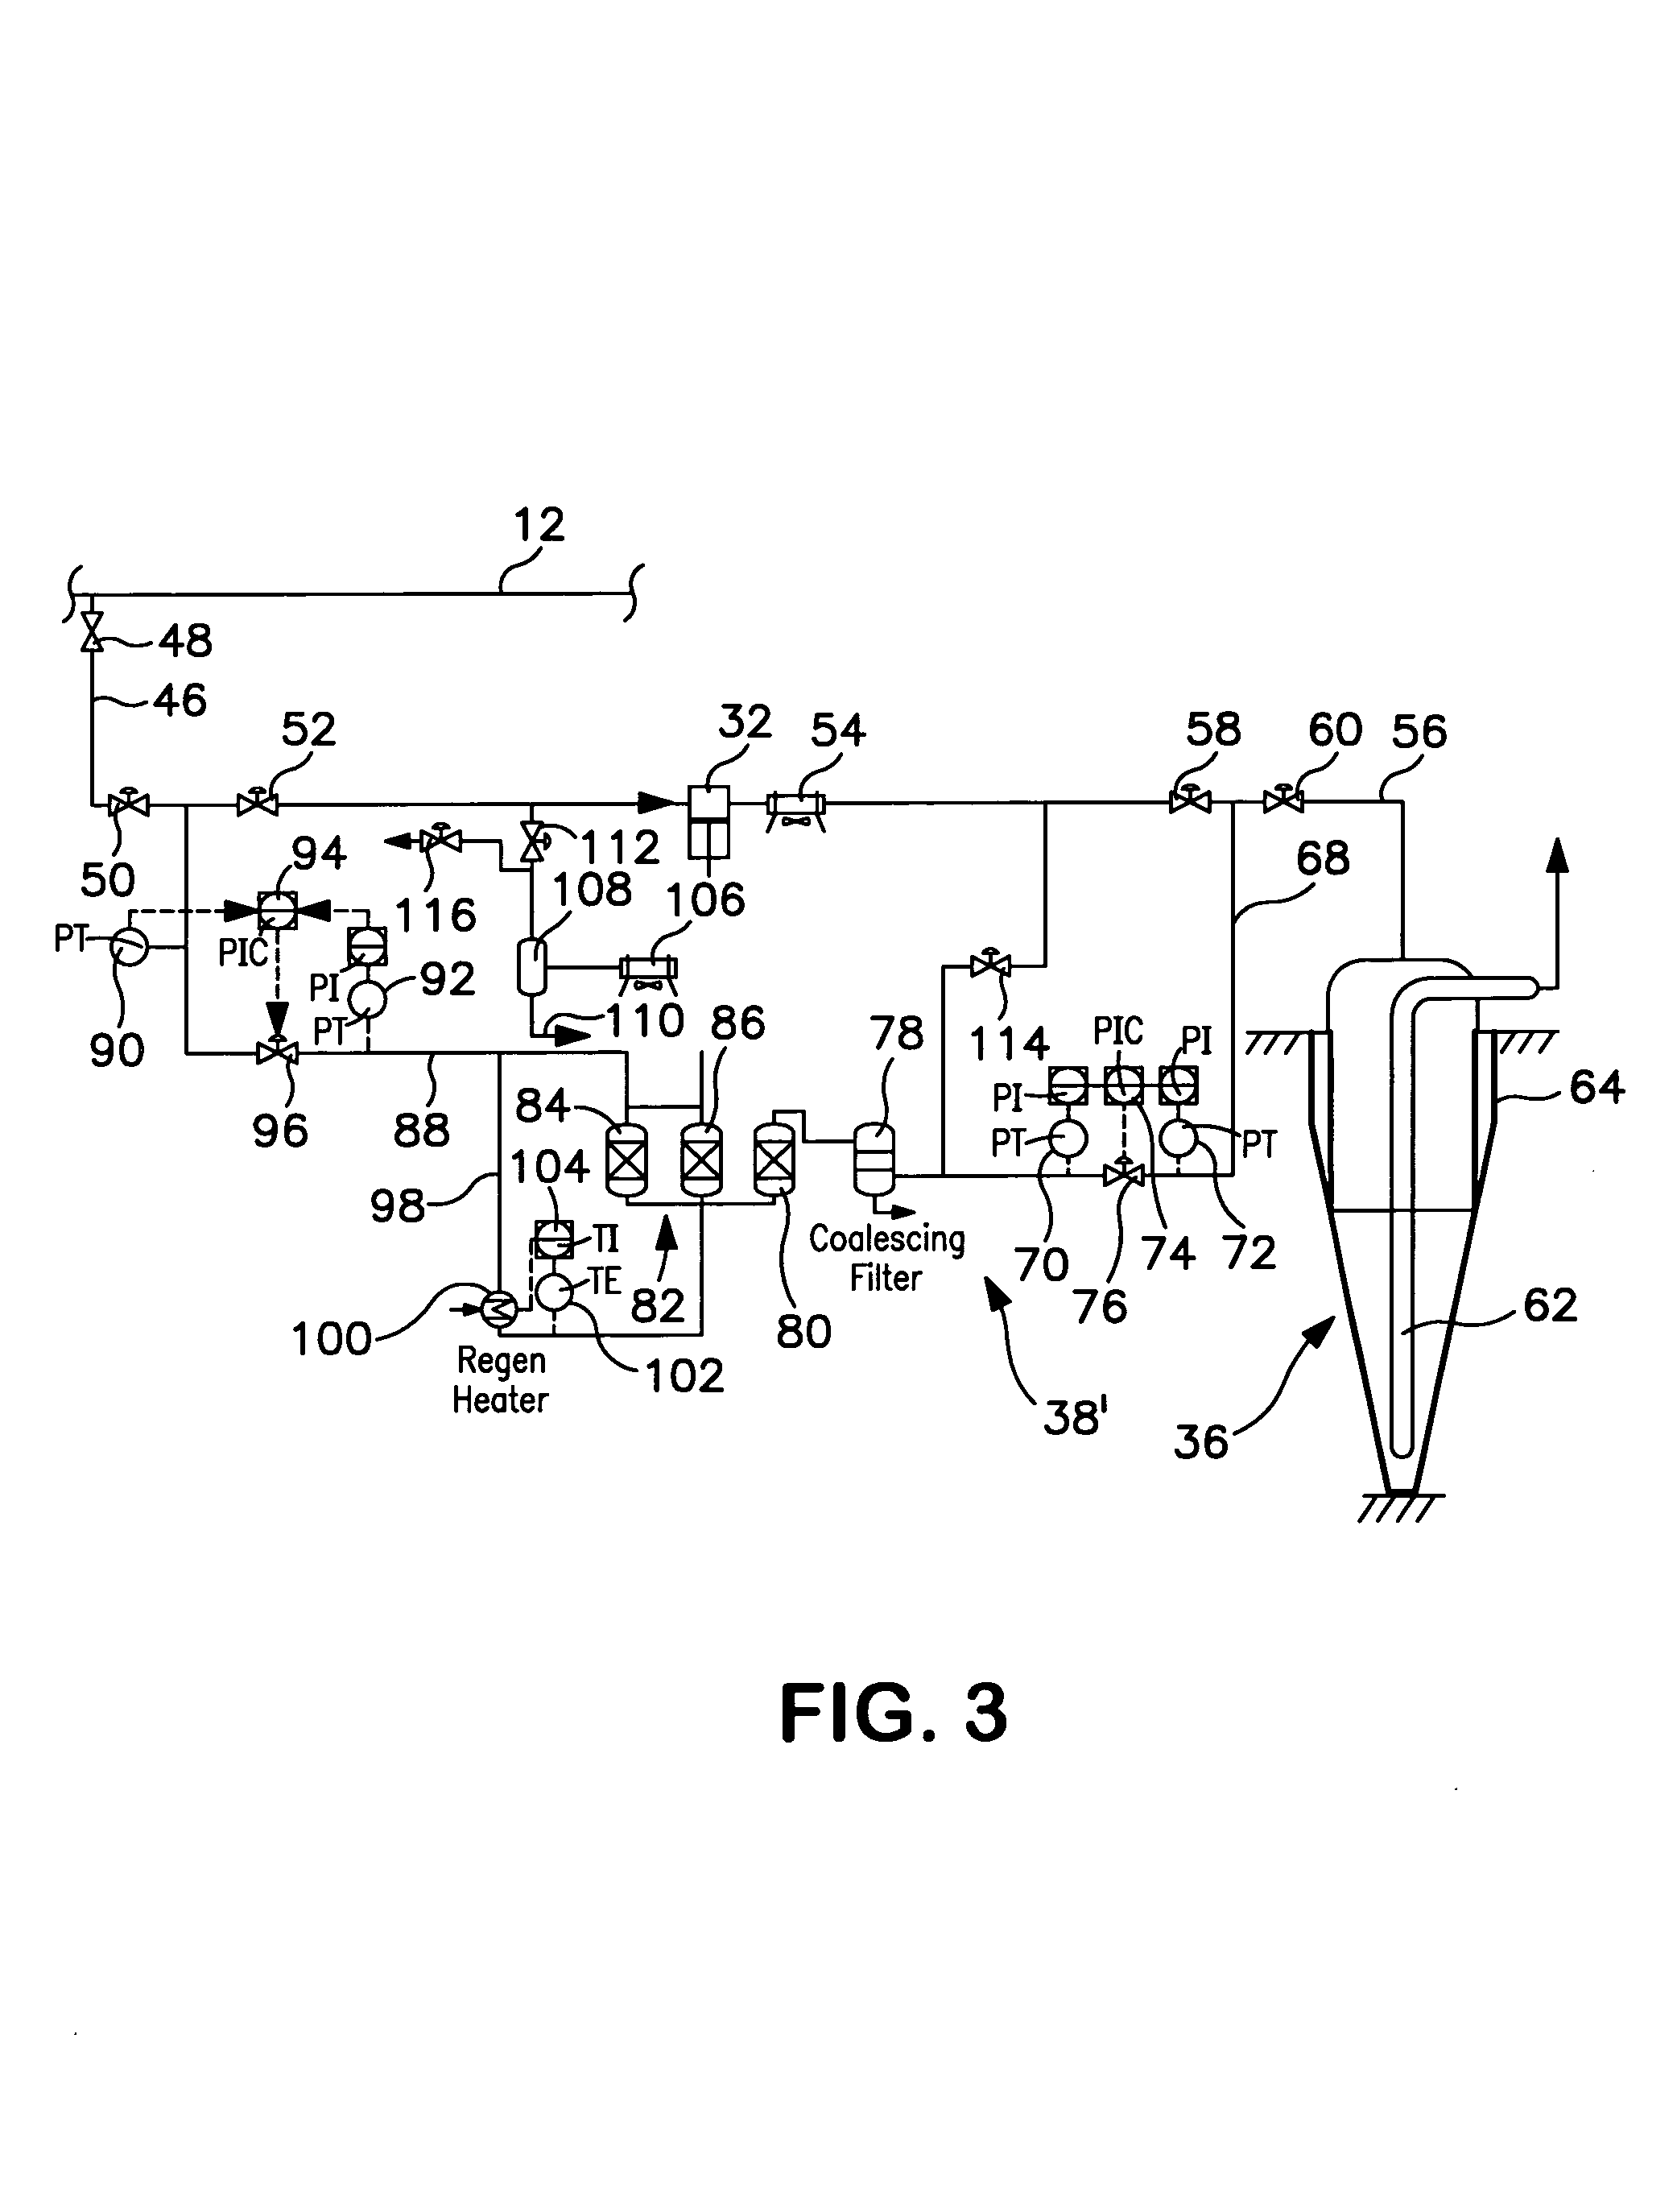 Method of storing and supplying hydrogen to a pipeline